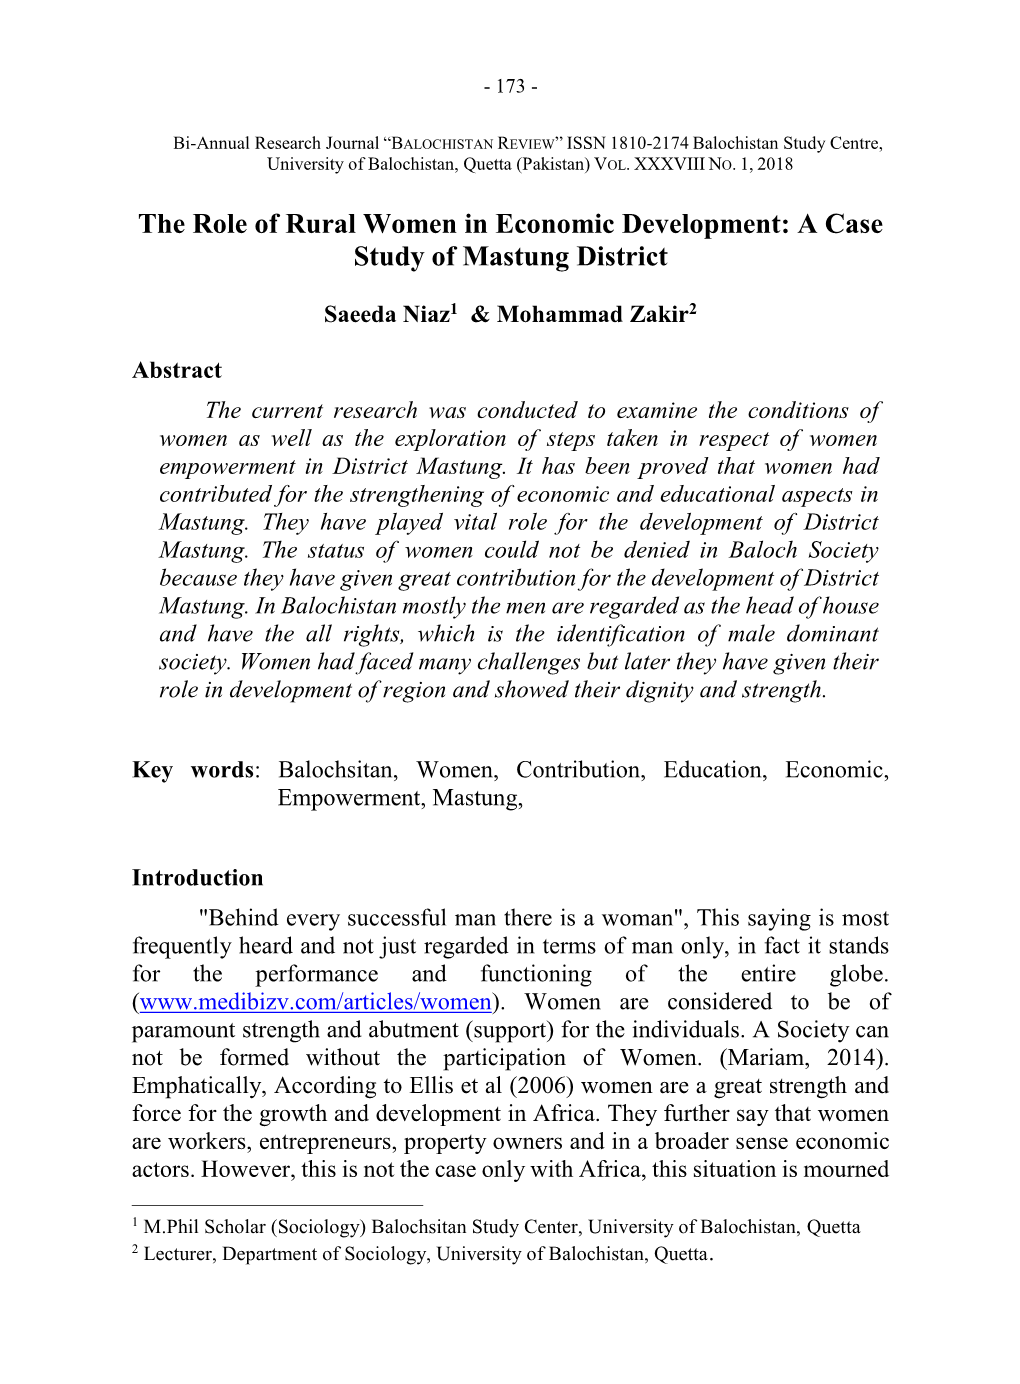 The Role of Rural Women in Economic Development: a Case Study of Mastung District